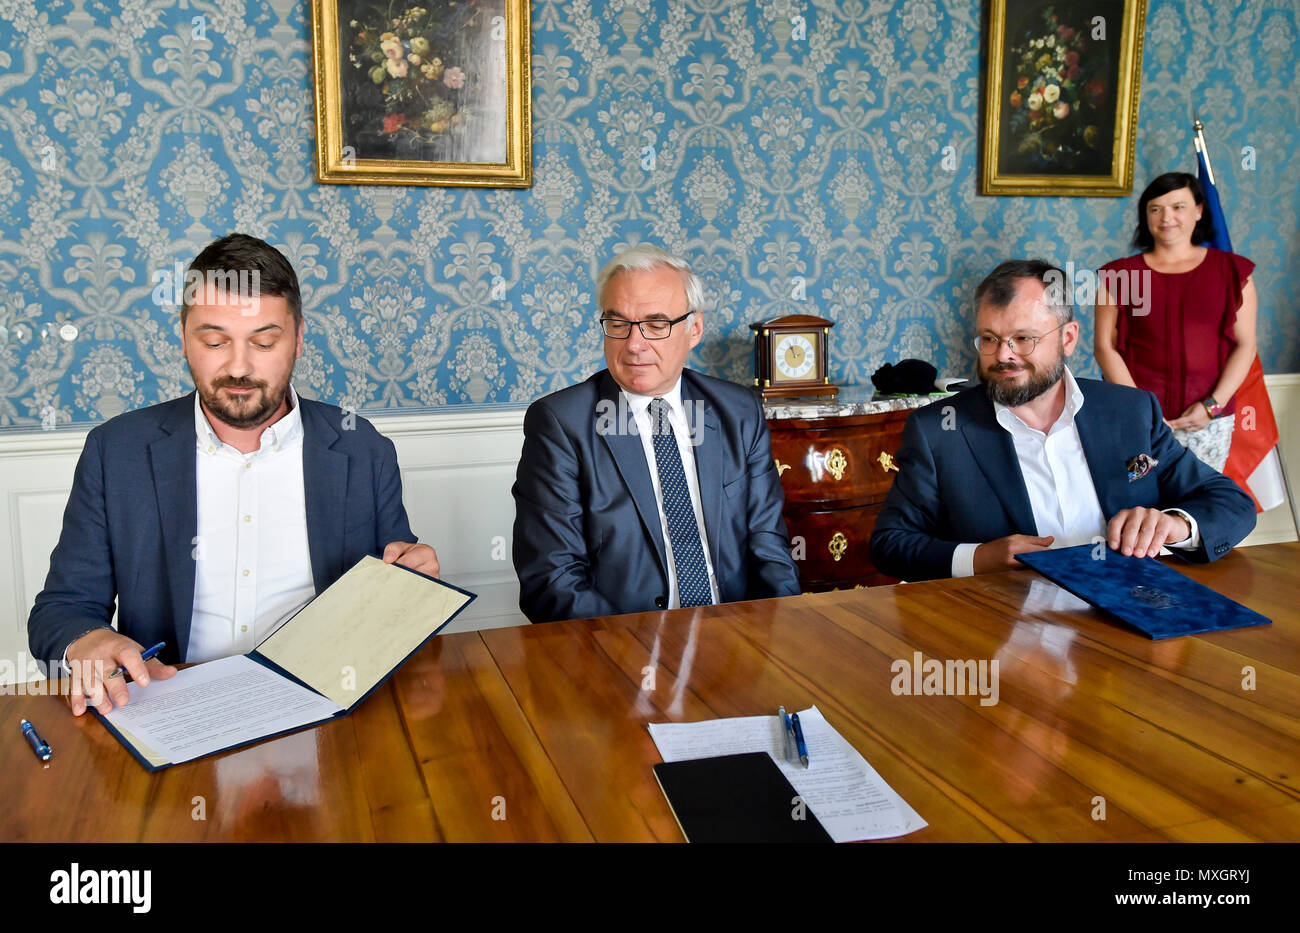 The National Film Archive (NFA) and the Film and Television School of the Academy of Performing Art (FAMU) in Prague made an agreement on the digitisation of Czech films today, on Monday, June 4, 2018. The agreement, signed by FAMU Dean Zdenek Holy, left, and NFA director Michal Bregant, right, guarantees that the digital restoration would be carried out in cooperation with the living film-makers, primarily the director, photographer and sound mixer, that their testimonies and expert opinions will be recorded. On the photo centre there is Culture Minister Ilja Smid. (CTK Photo/Vit Simanek) Stock Photo